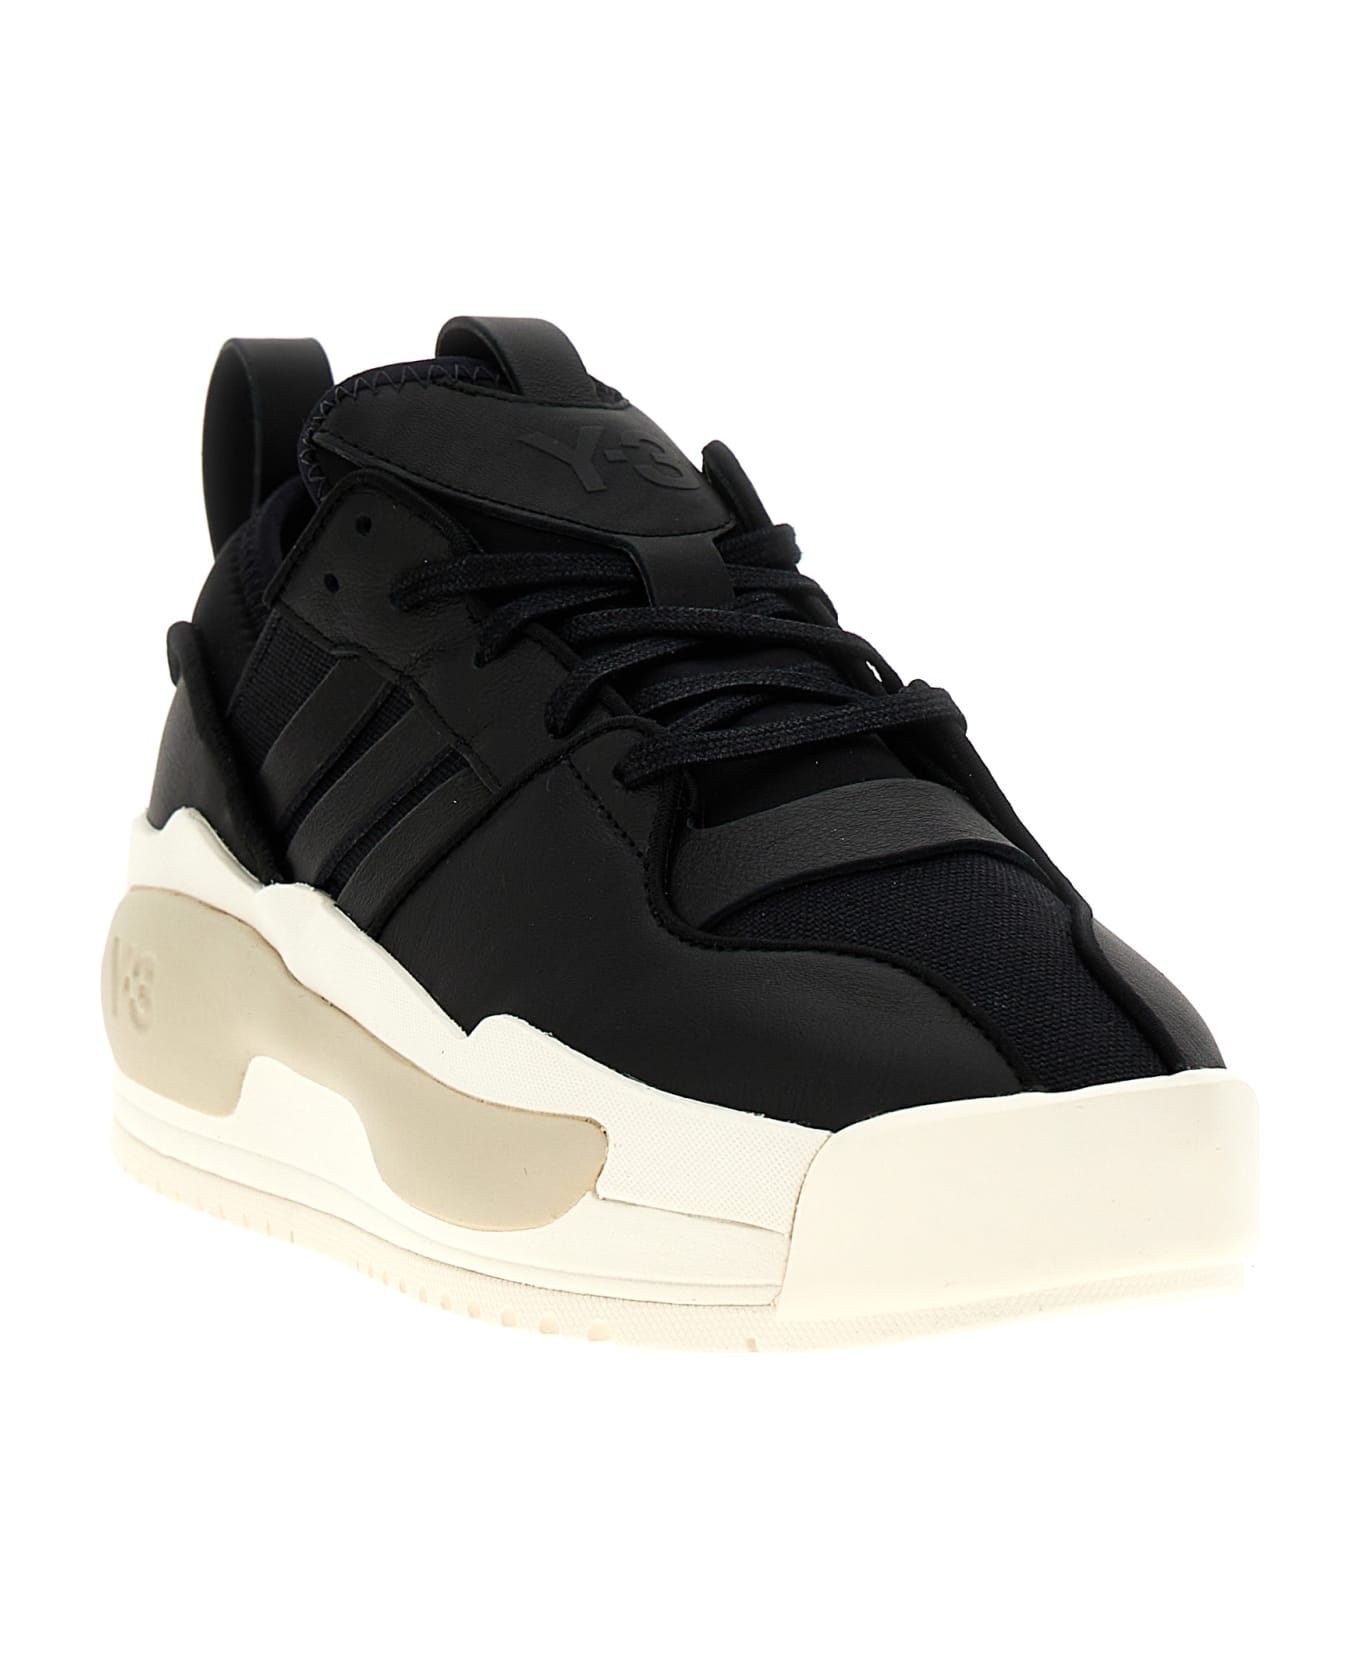 Y-3 'rivalry' Sneakers - White/Black